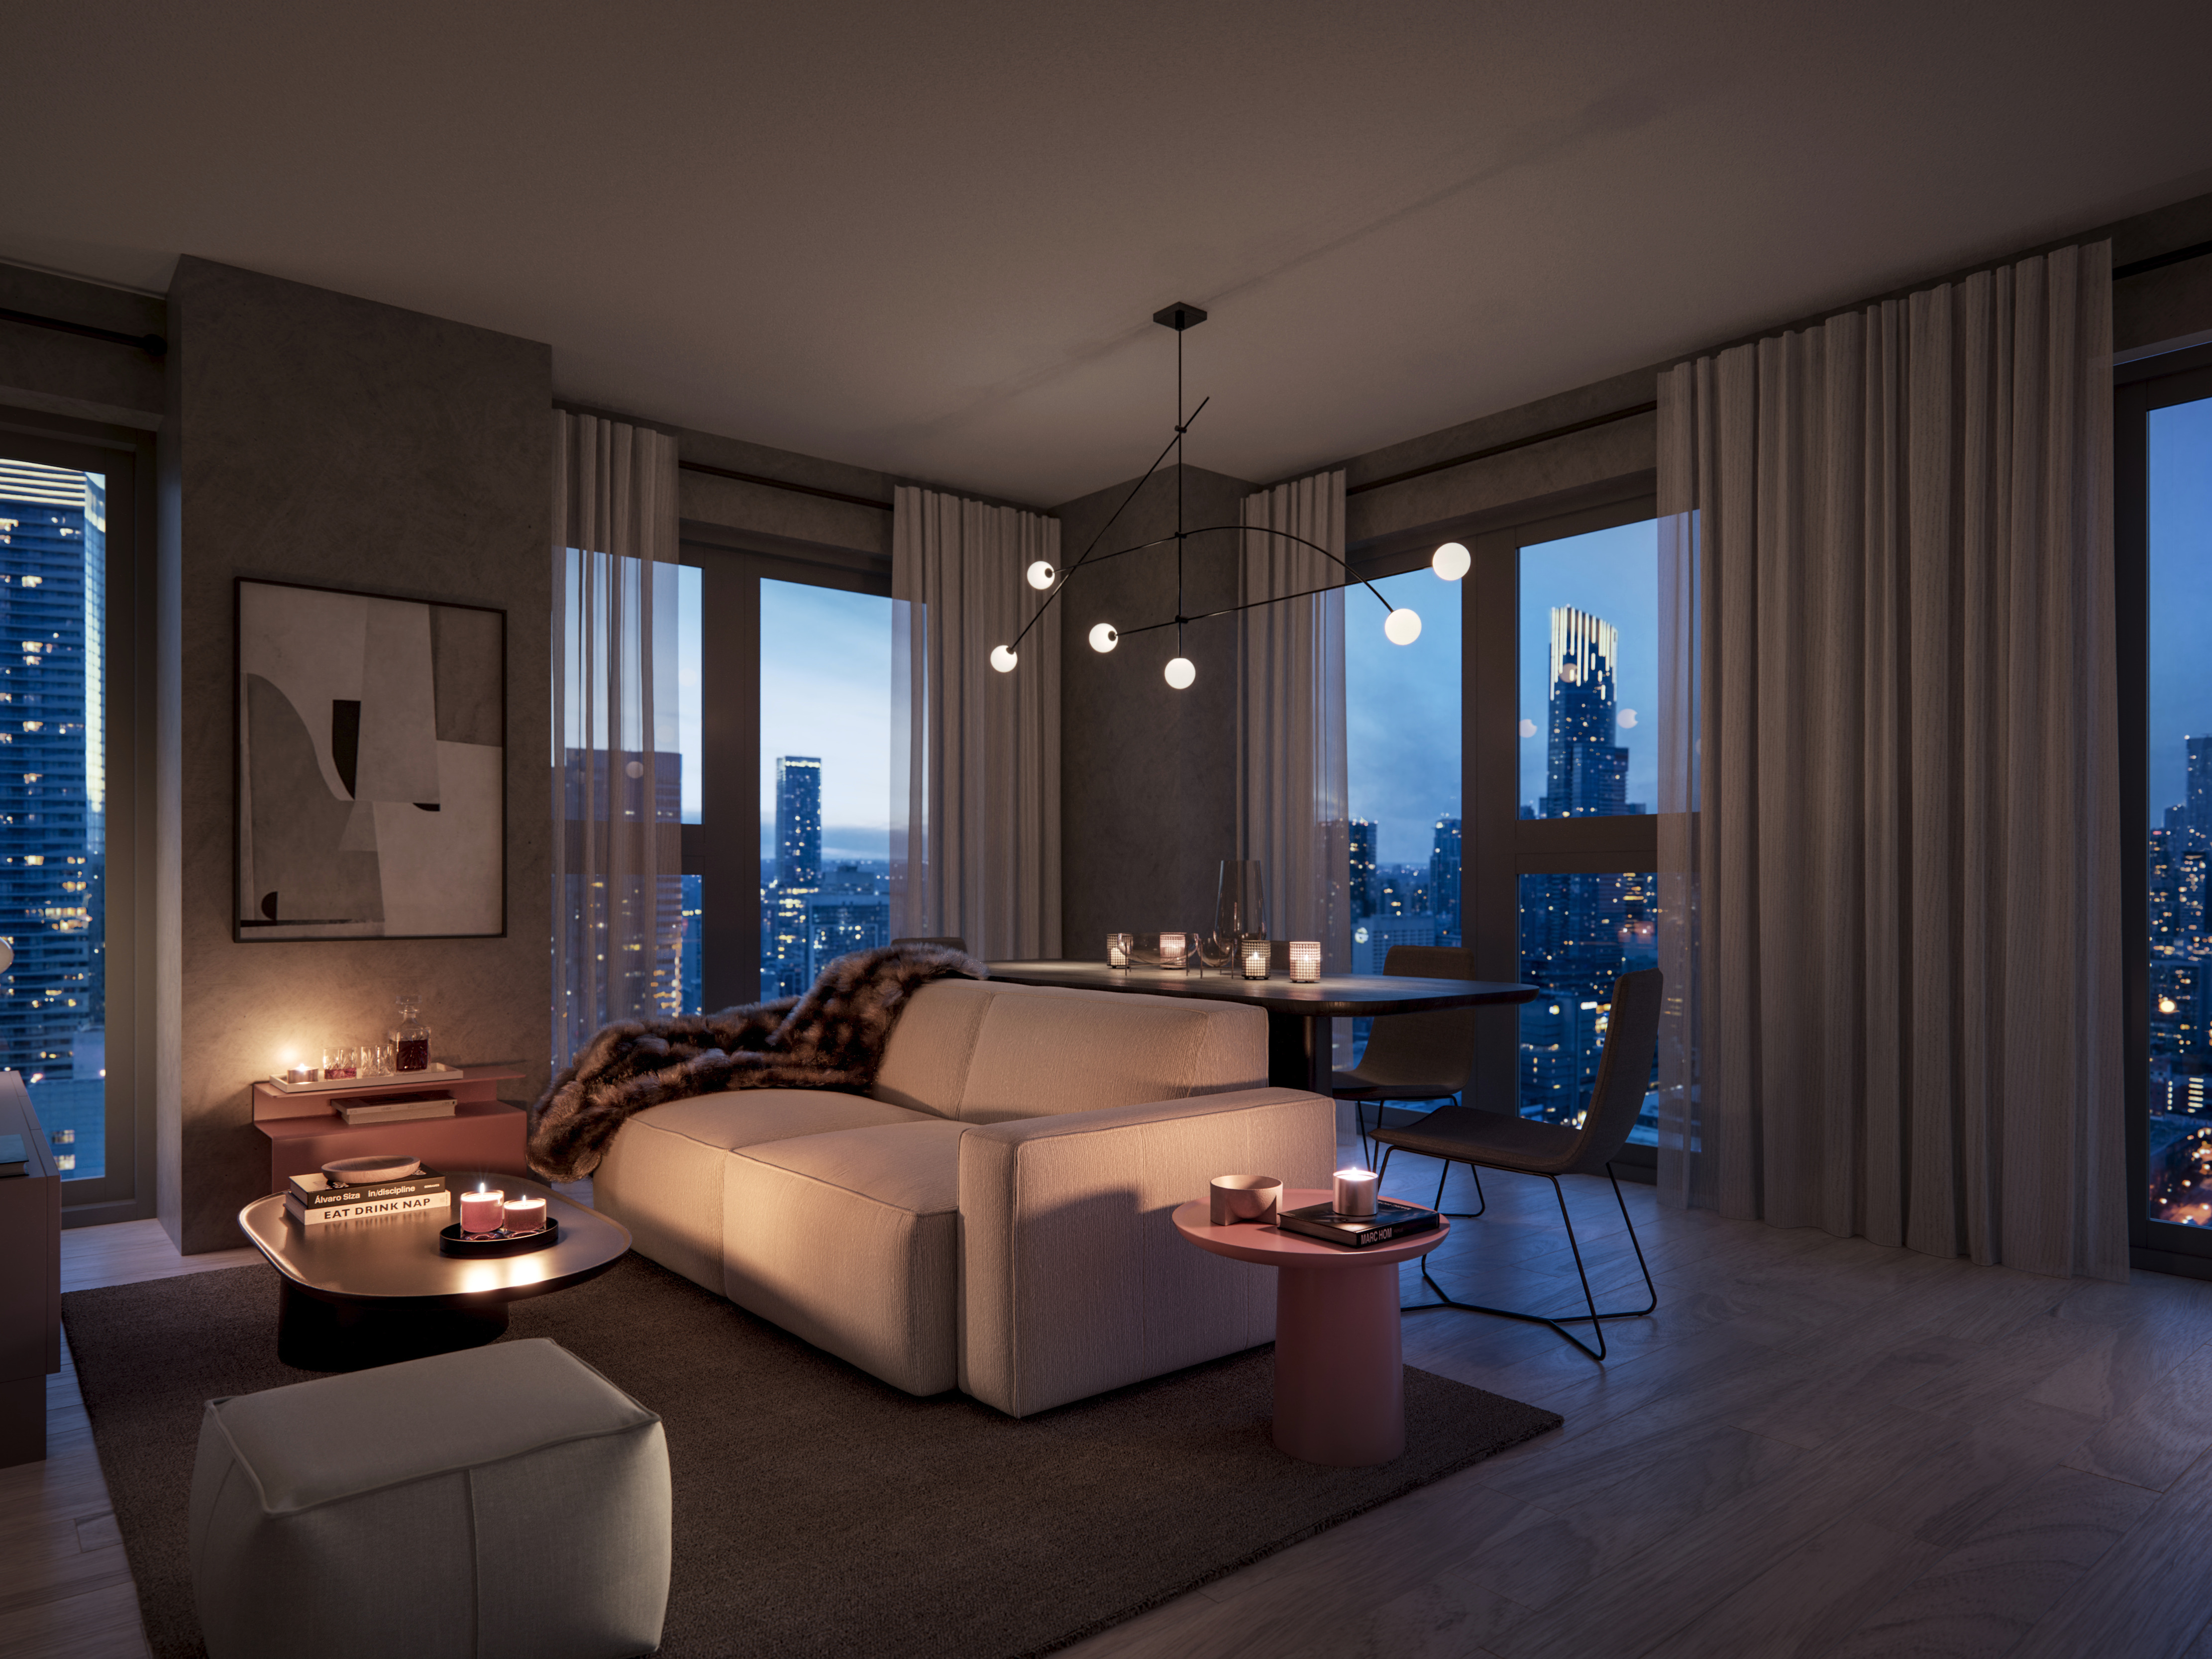 Queen Church Model Suite Rendering (Living Room at Night Time)